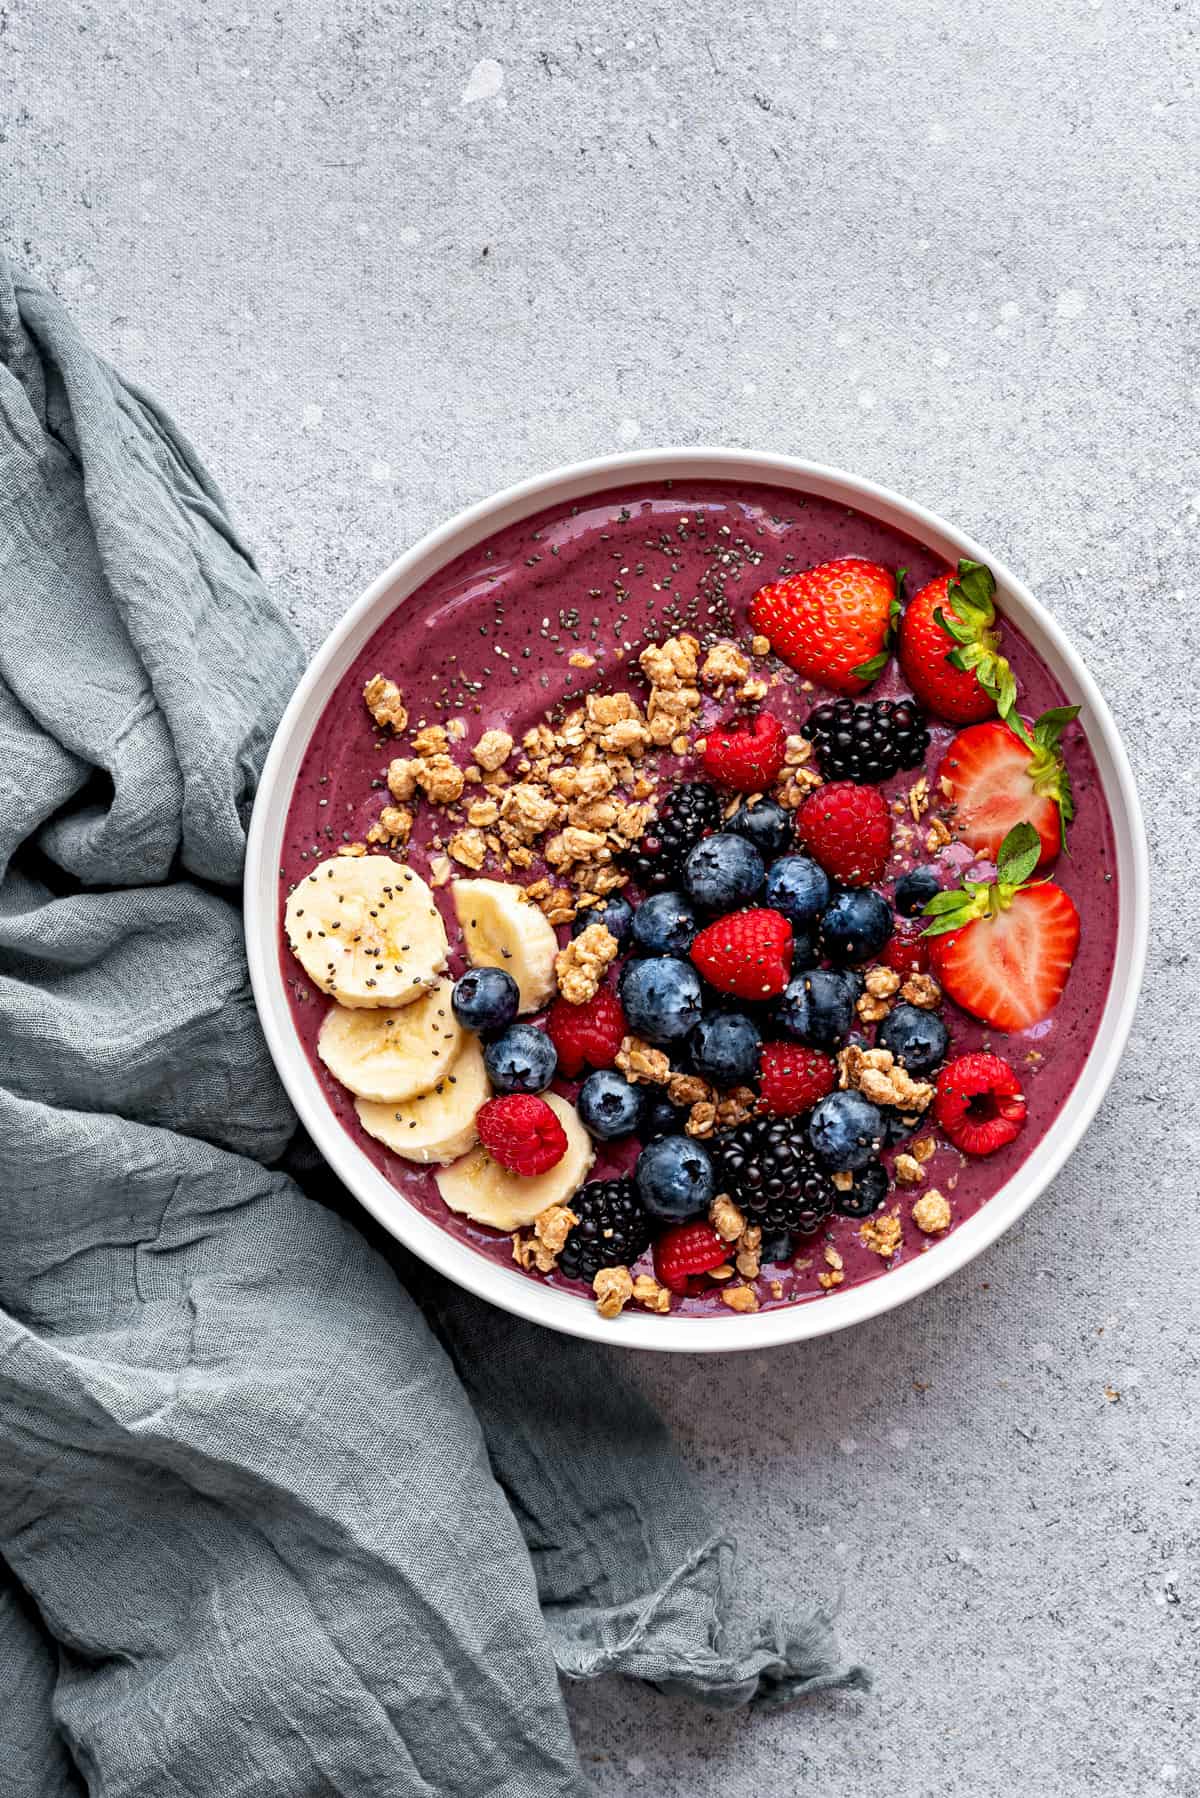 Large white bowl with blended acai berry smoothie, topped with slices of bananas, granola, fresh berries and chia seeds.